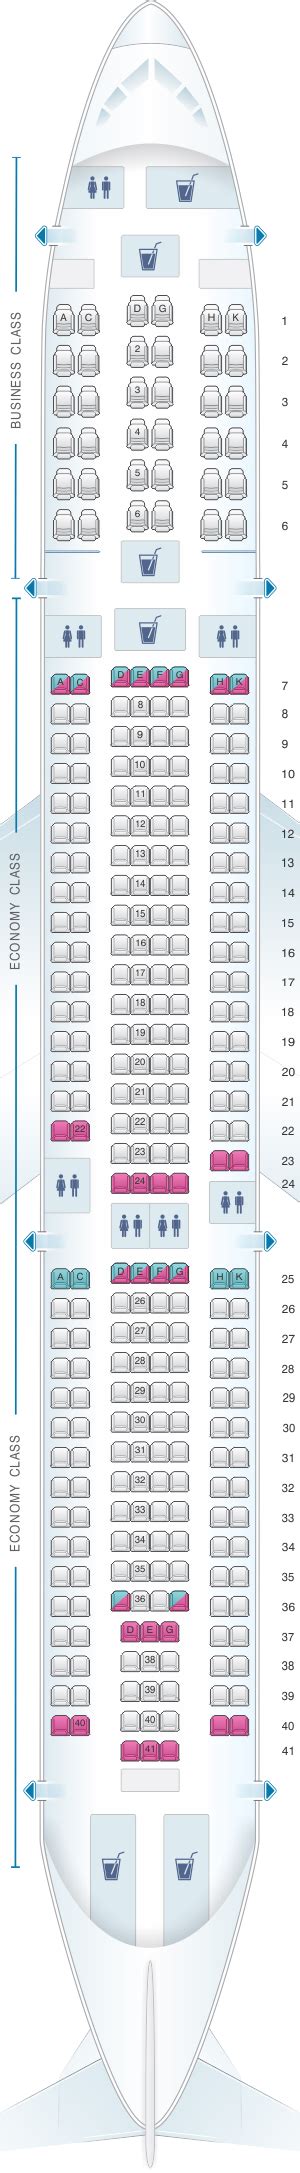 United Airlines Airbus A330 300 Seating Chart Bios Pics